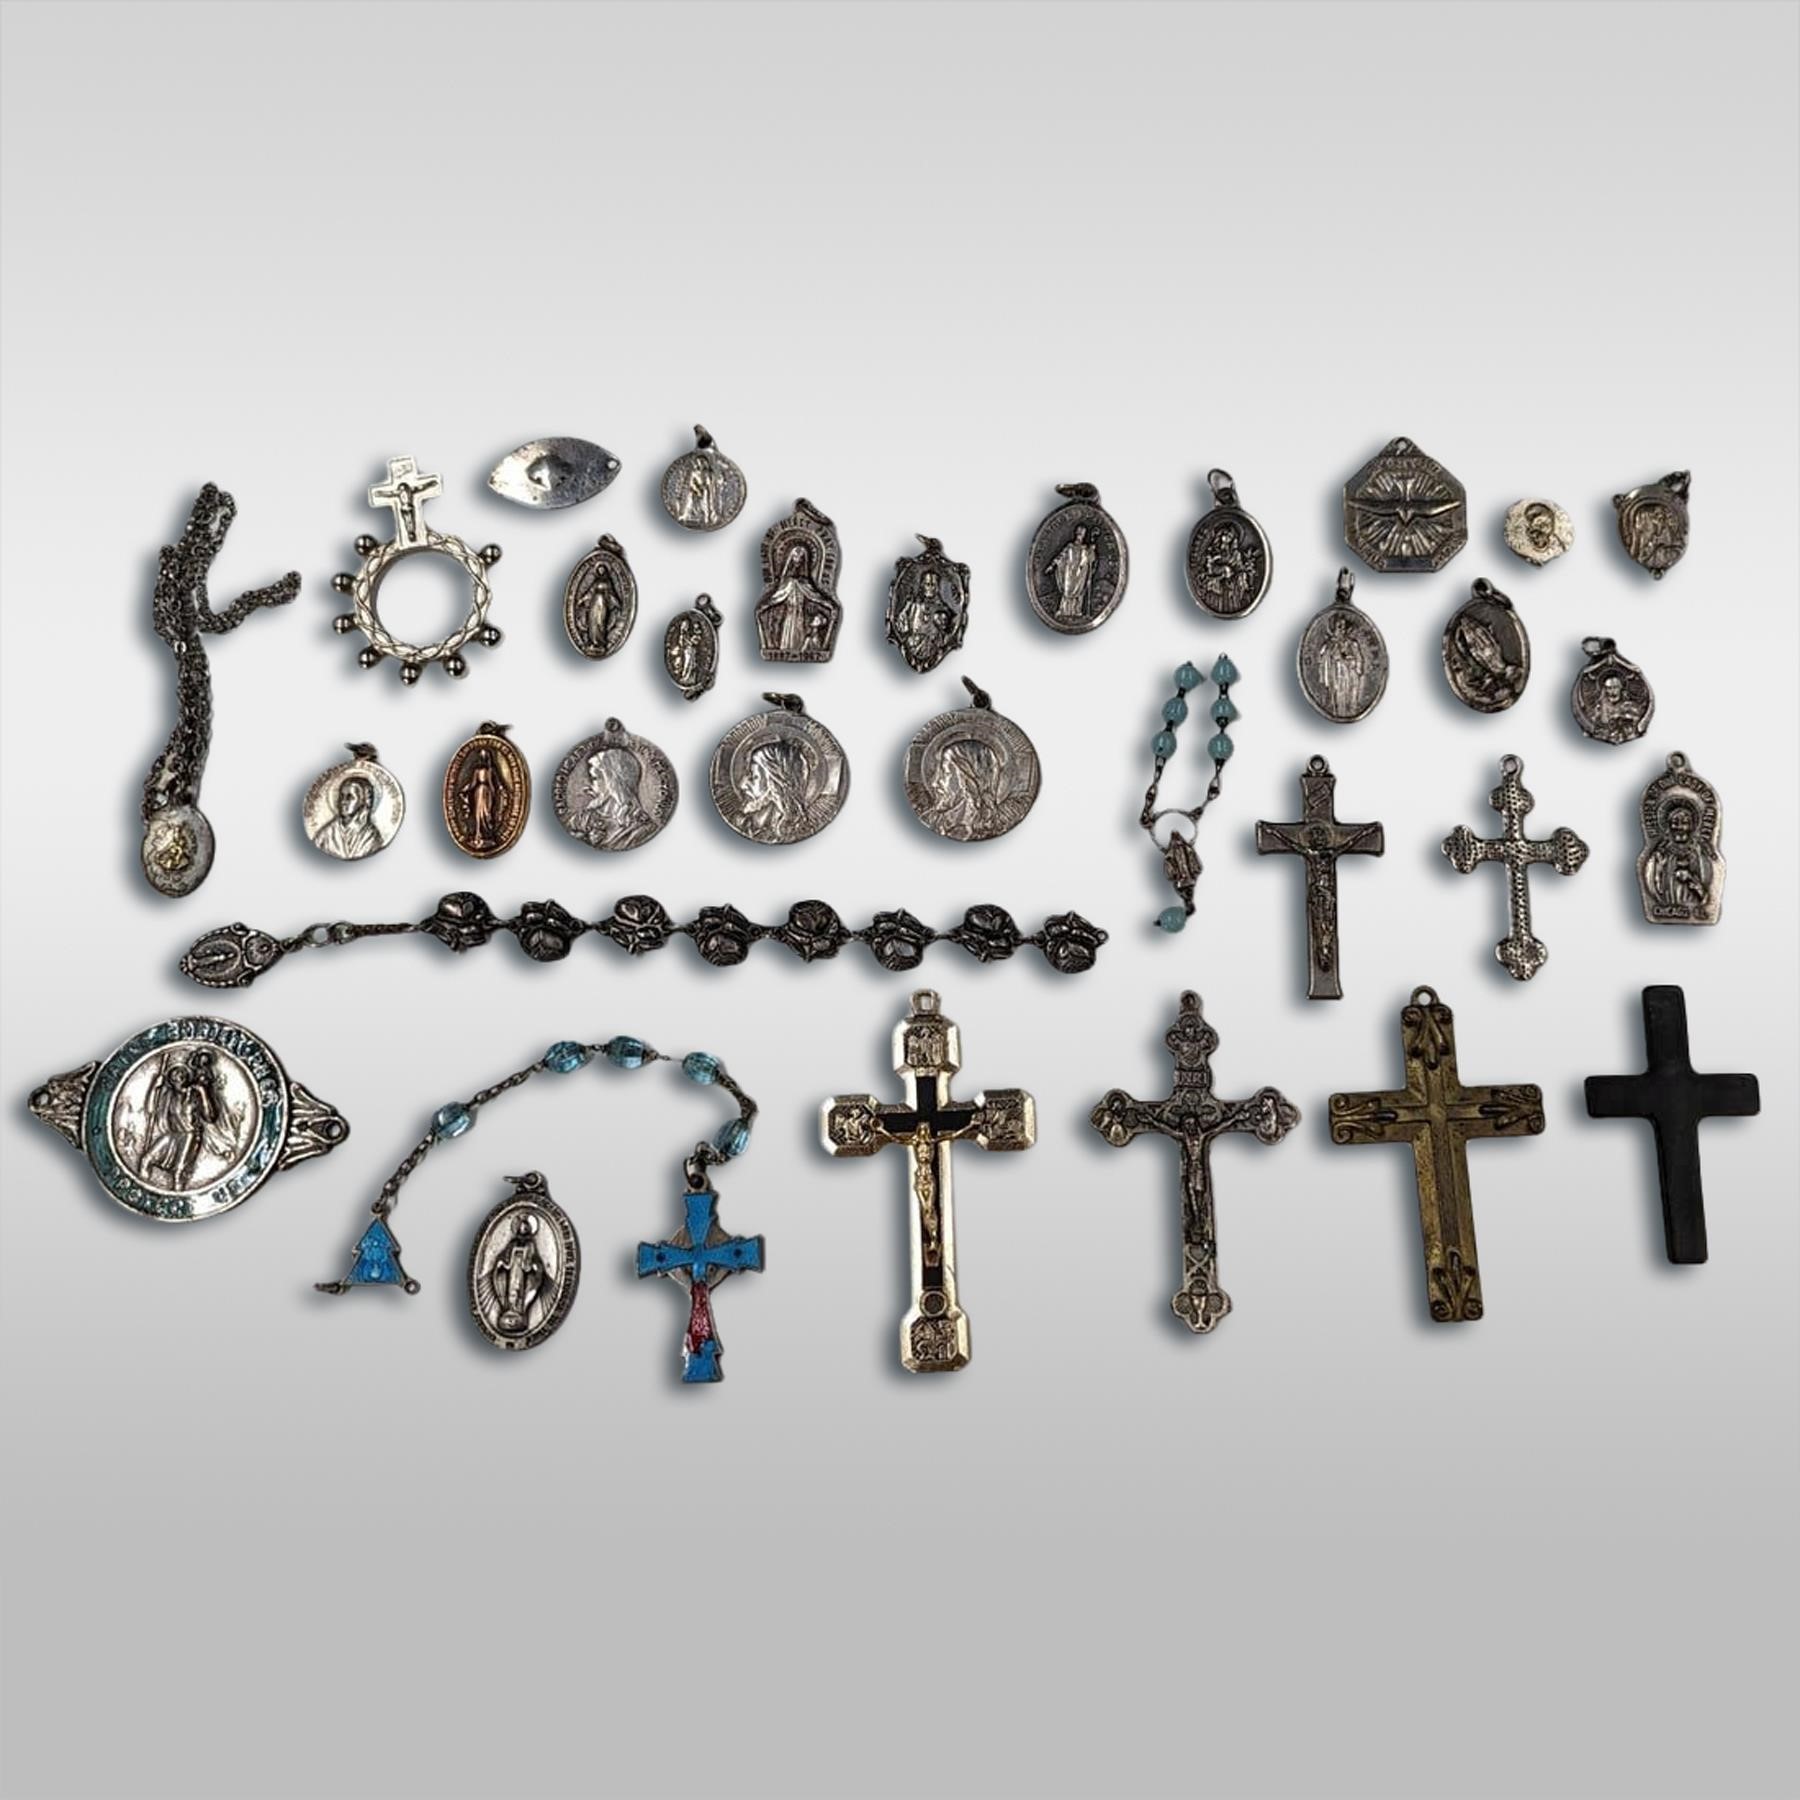 Large Grouping Of Small Religious Pendants / Acce